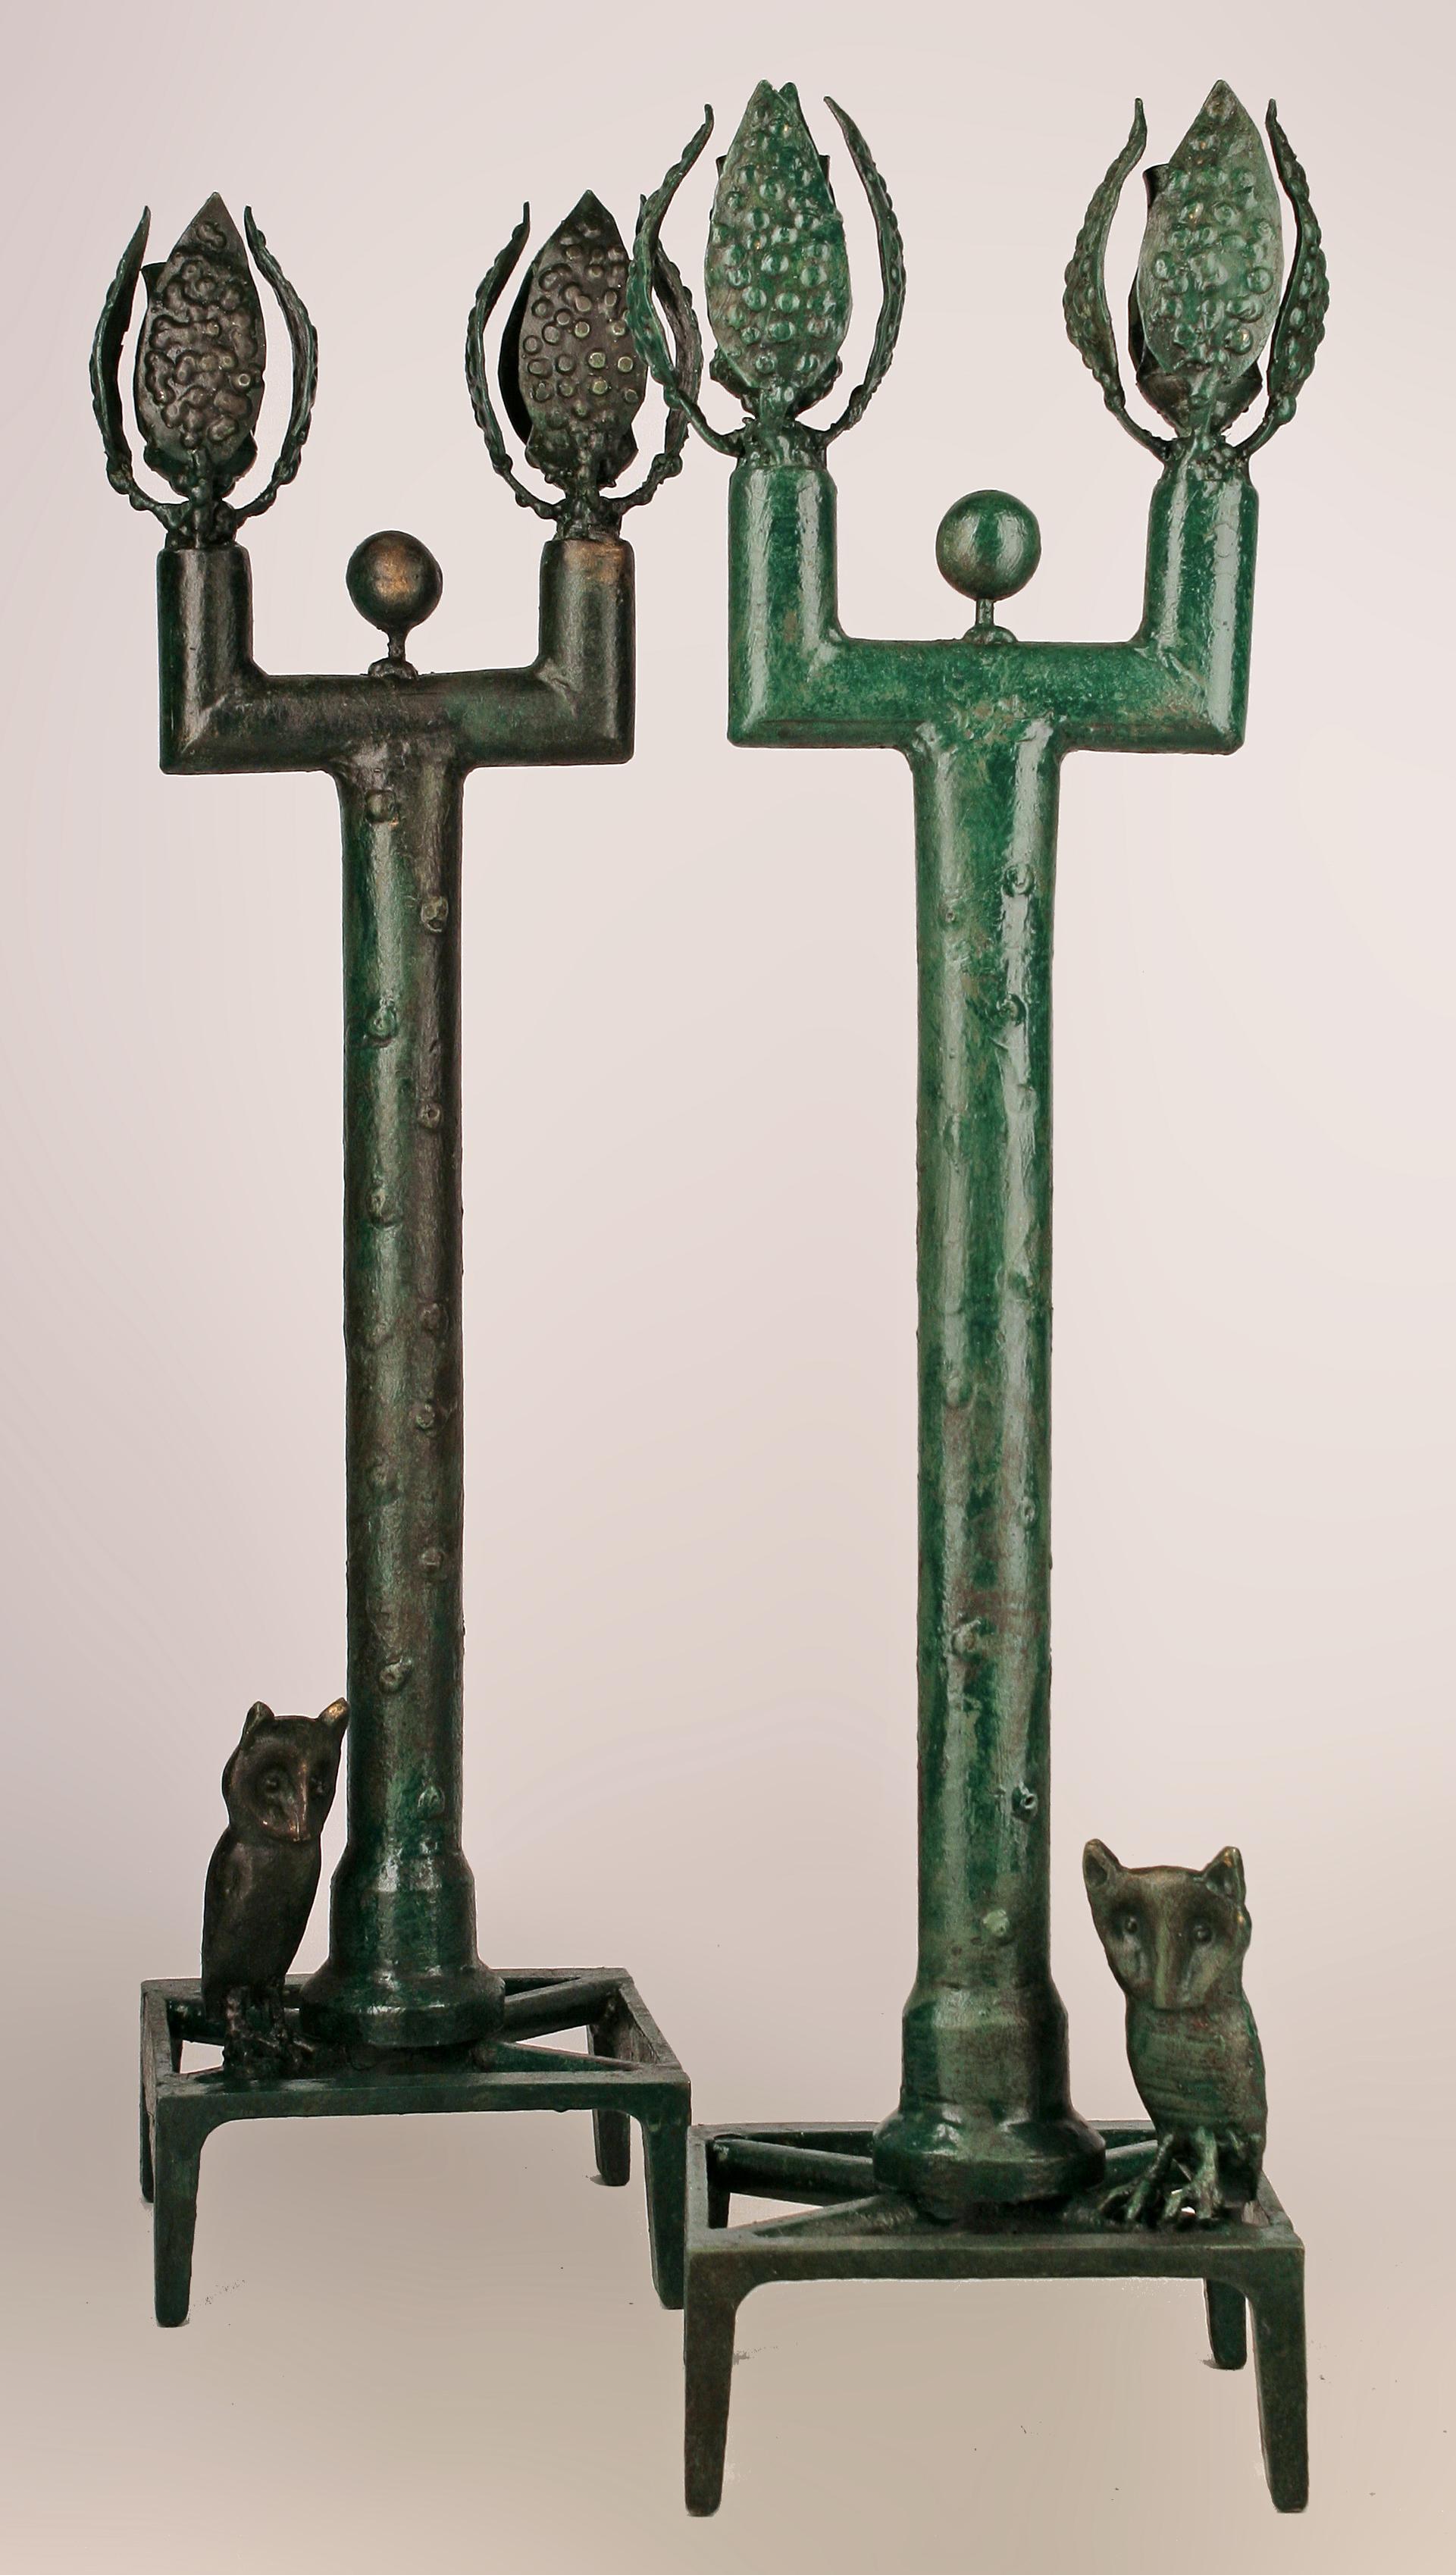 Late 20th century Expressionist Giacometti-like pair of french bronze candle holders

By: Diego Giacometti (in the style of)
Material: bronze, copper, metal
Technique: cast, patinated, molded, metalwork
Dimensions: 6 in x 6 in x 22 in
Date: late